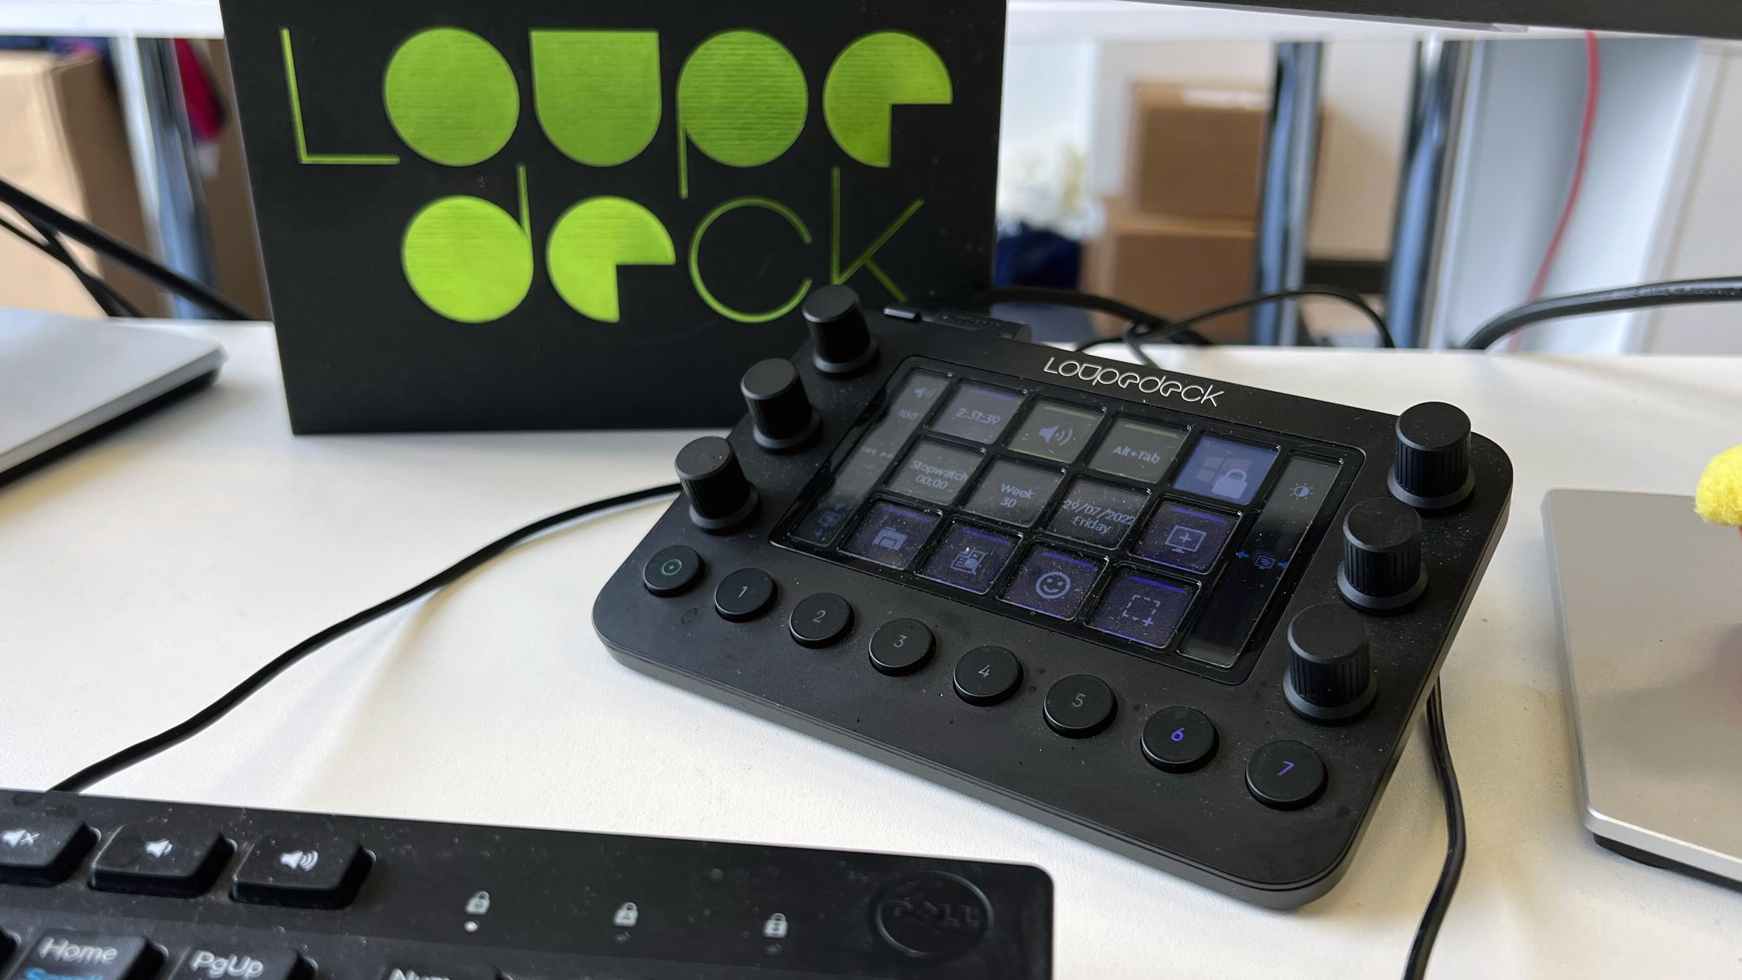 Loupedeck Launches Loupedeck Live for Content Creators and Streamers